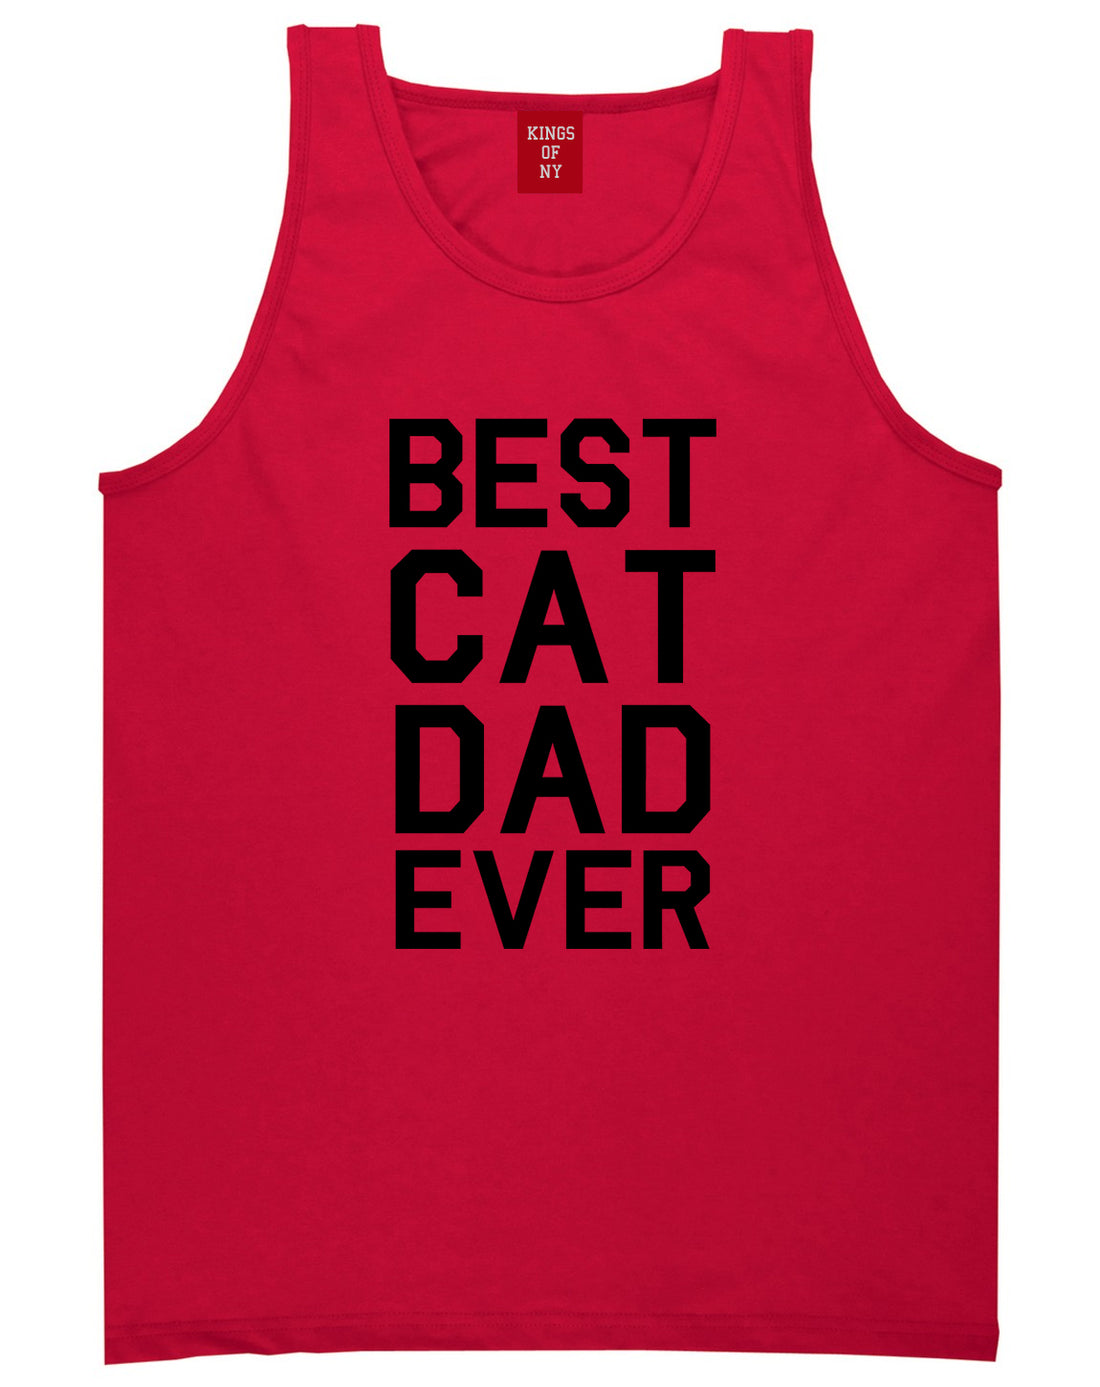 Best_Cat_Dad_Ever Mens Red Tank Top Shirt by Kings Of NY